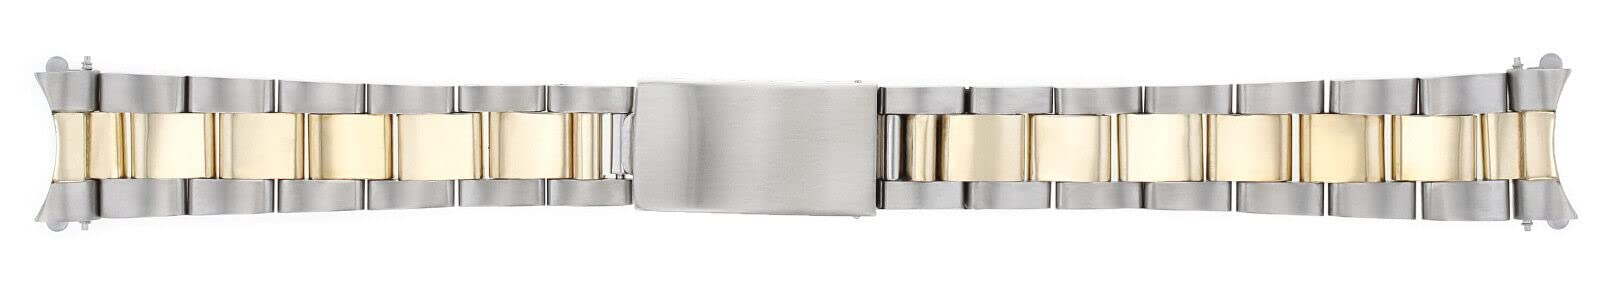 Ewatchparts MIDSIZE 14K/SS 17MM OYSTER WATCH BAND COMPATIBLE WITH ROLEX 31MM MIDSIZE 68274 68273 68240